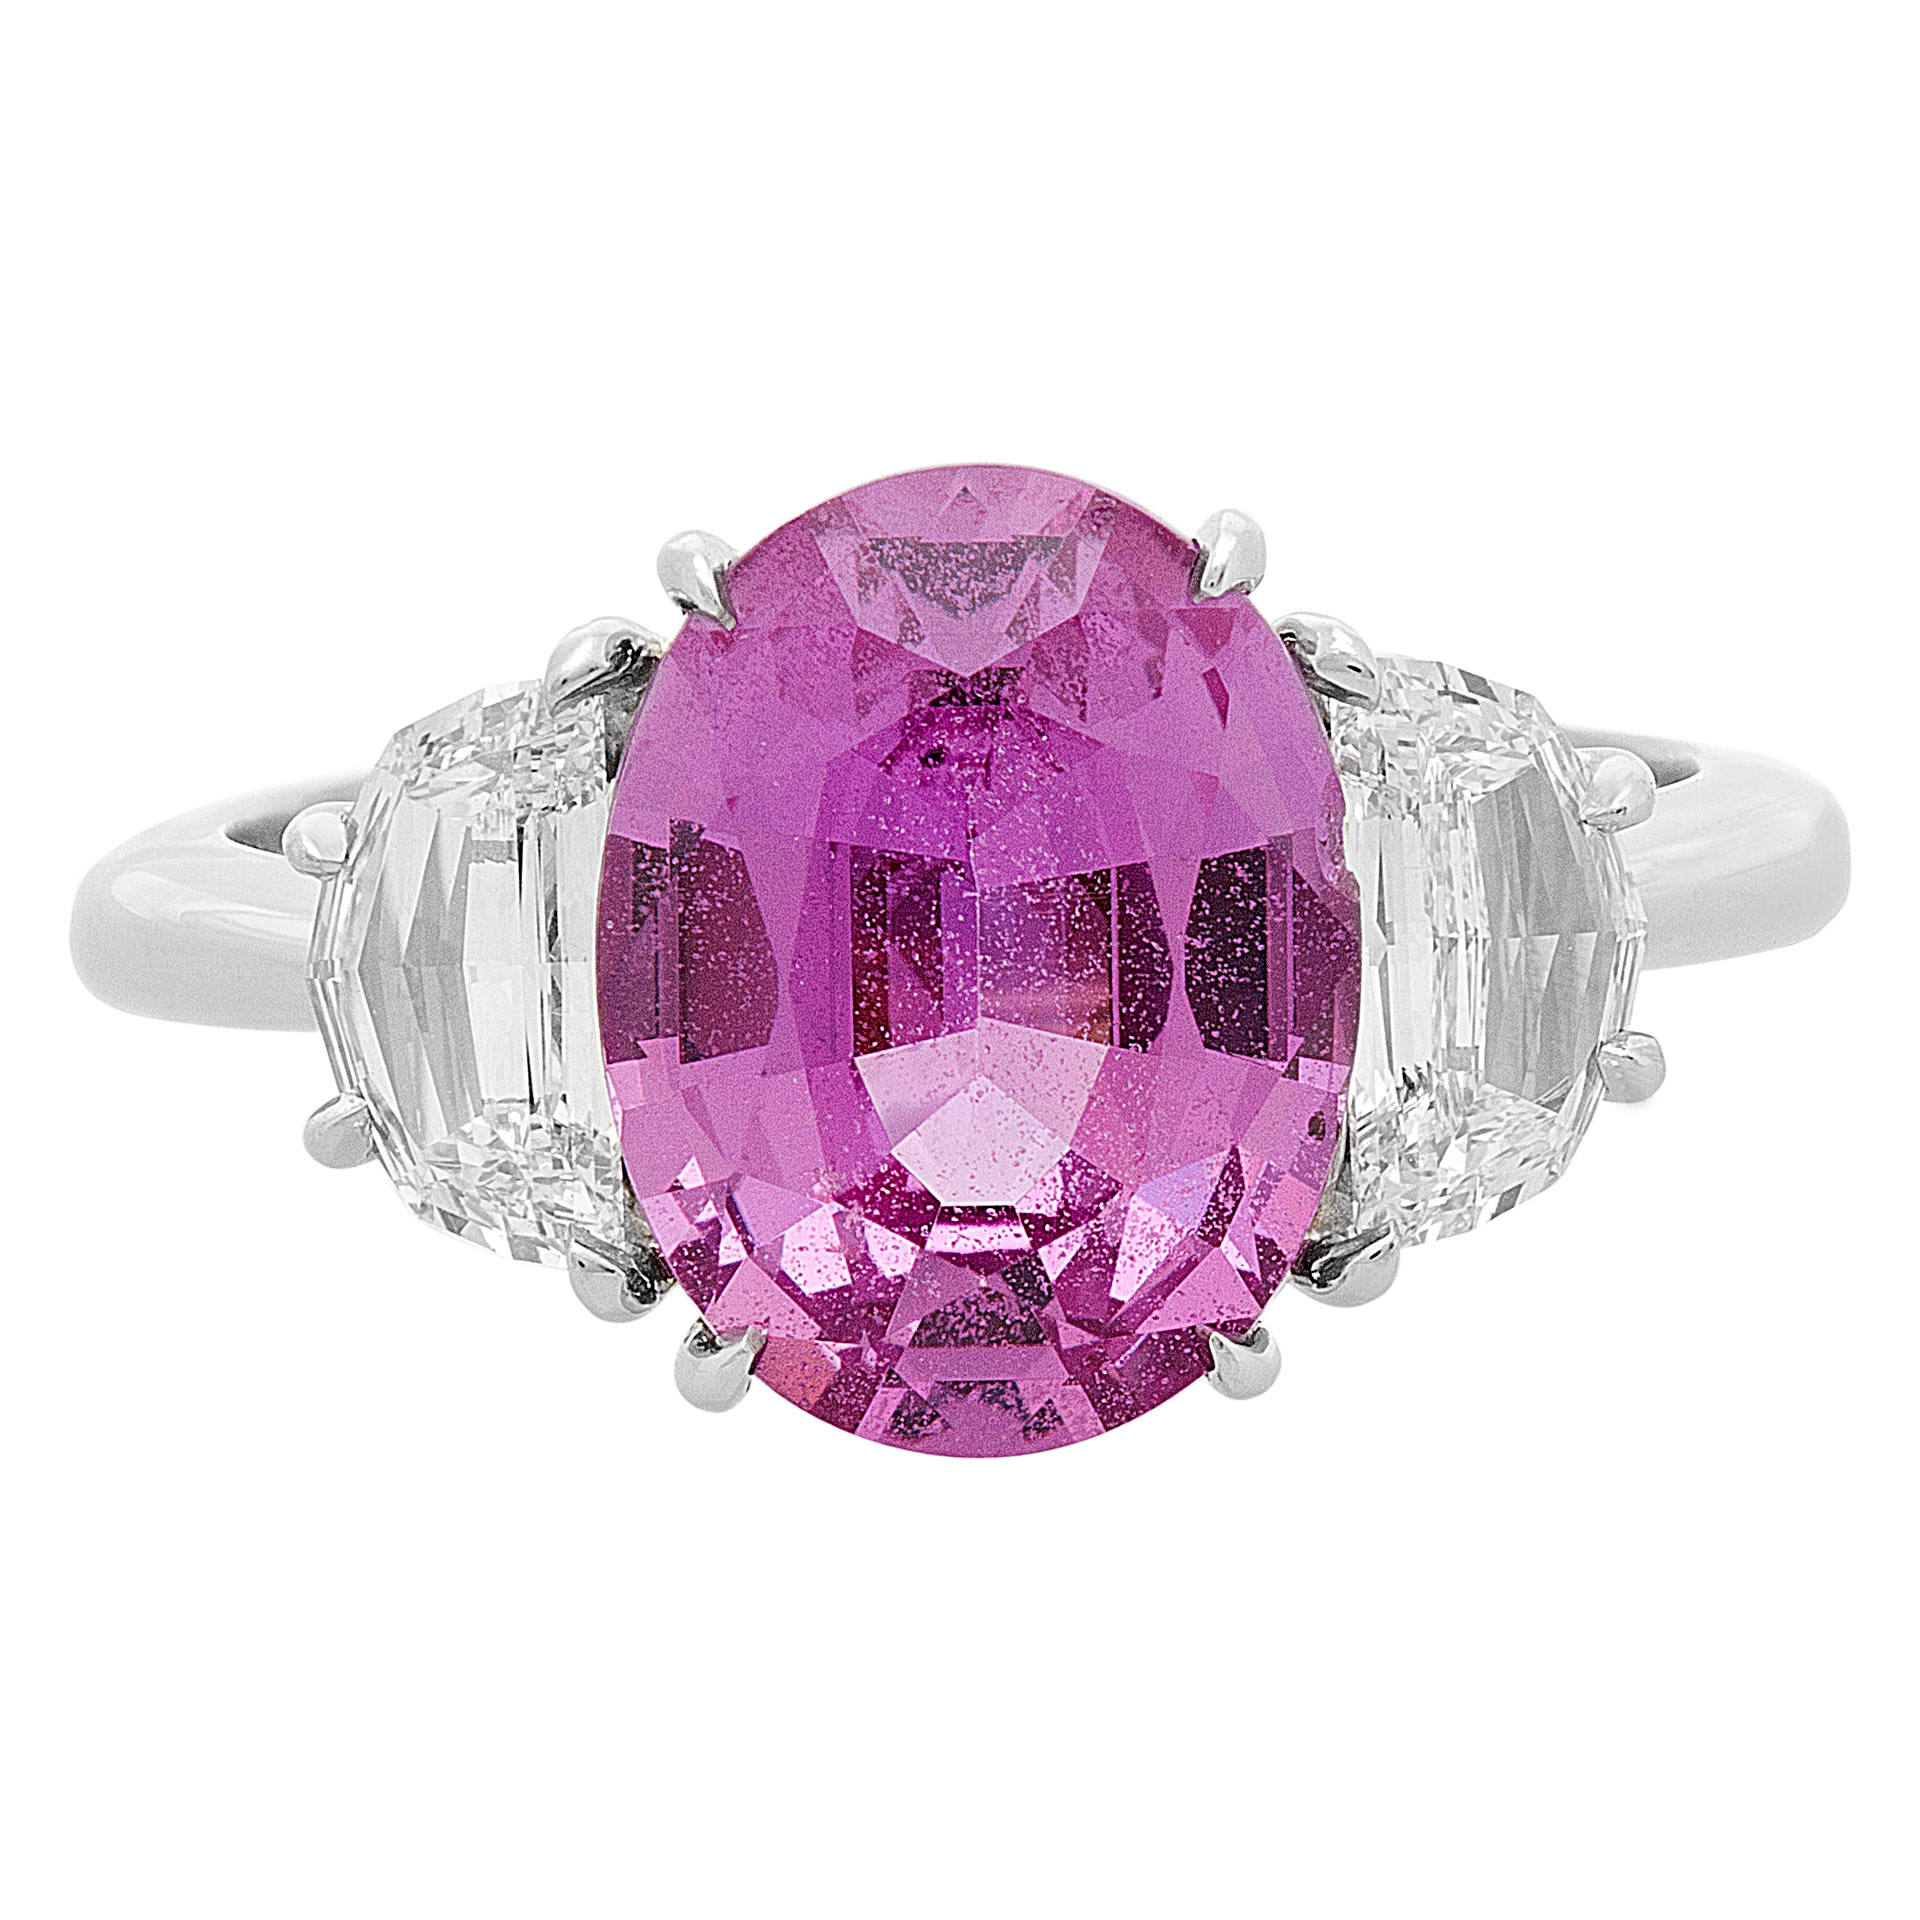 Madagascar Pink 3.68 carat oval cut sapphire ring with .79 cts in half moon diamonds